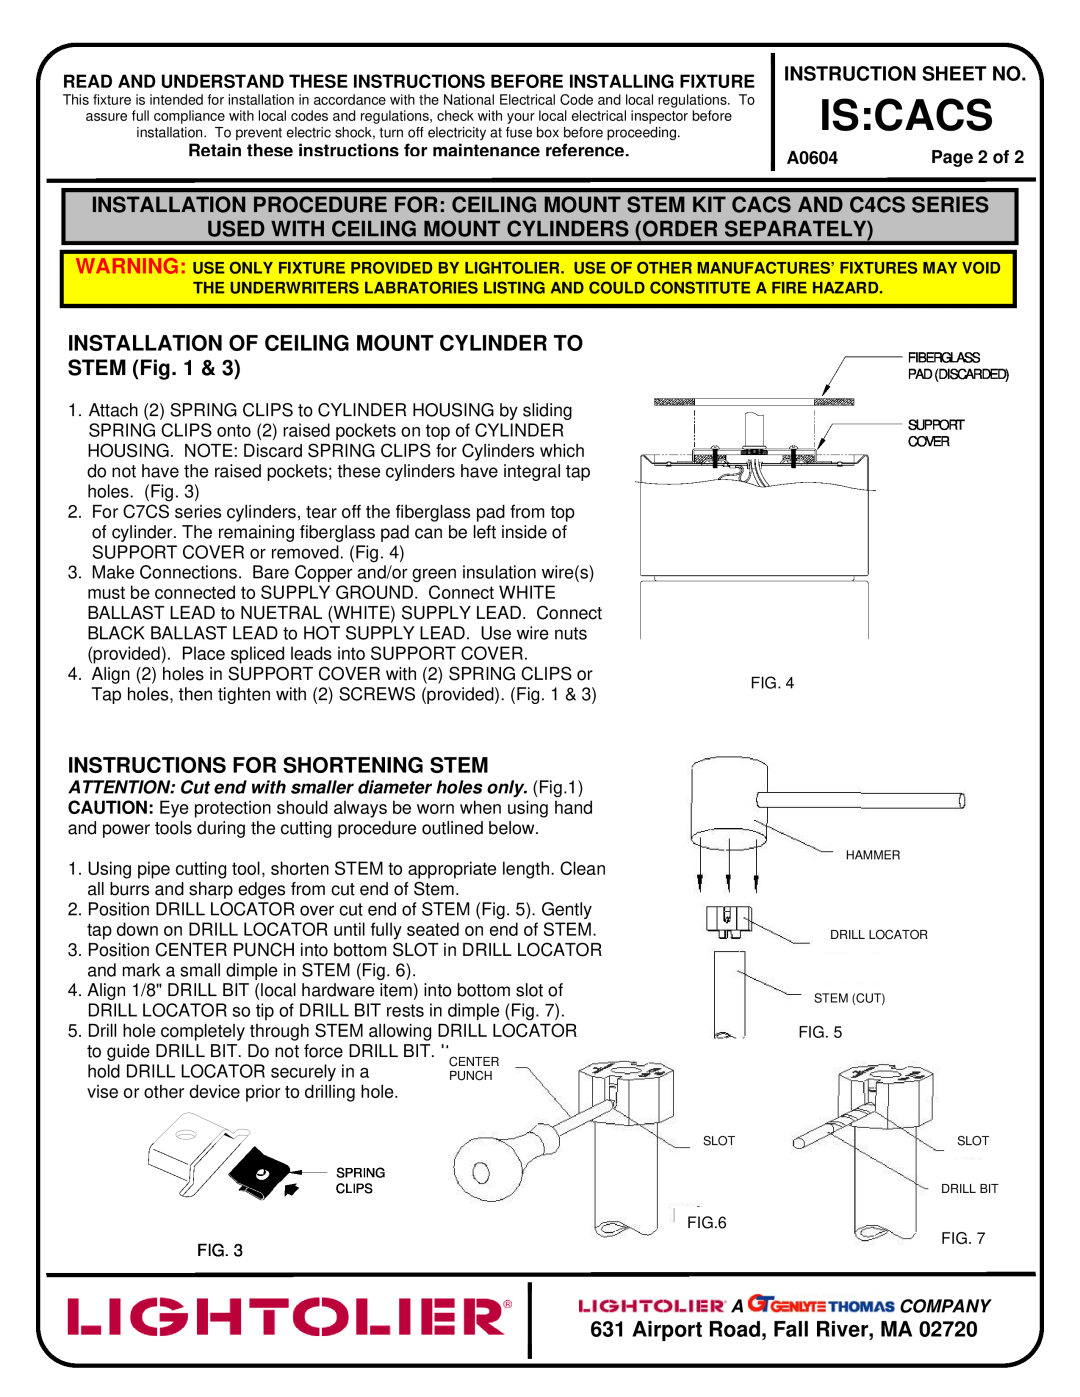 Lightolier IS_CACS Instructions For Shortening Stem, Page 2 of, Is Cacs, Airport Road, Fall River, MA, A0604, A Company 